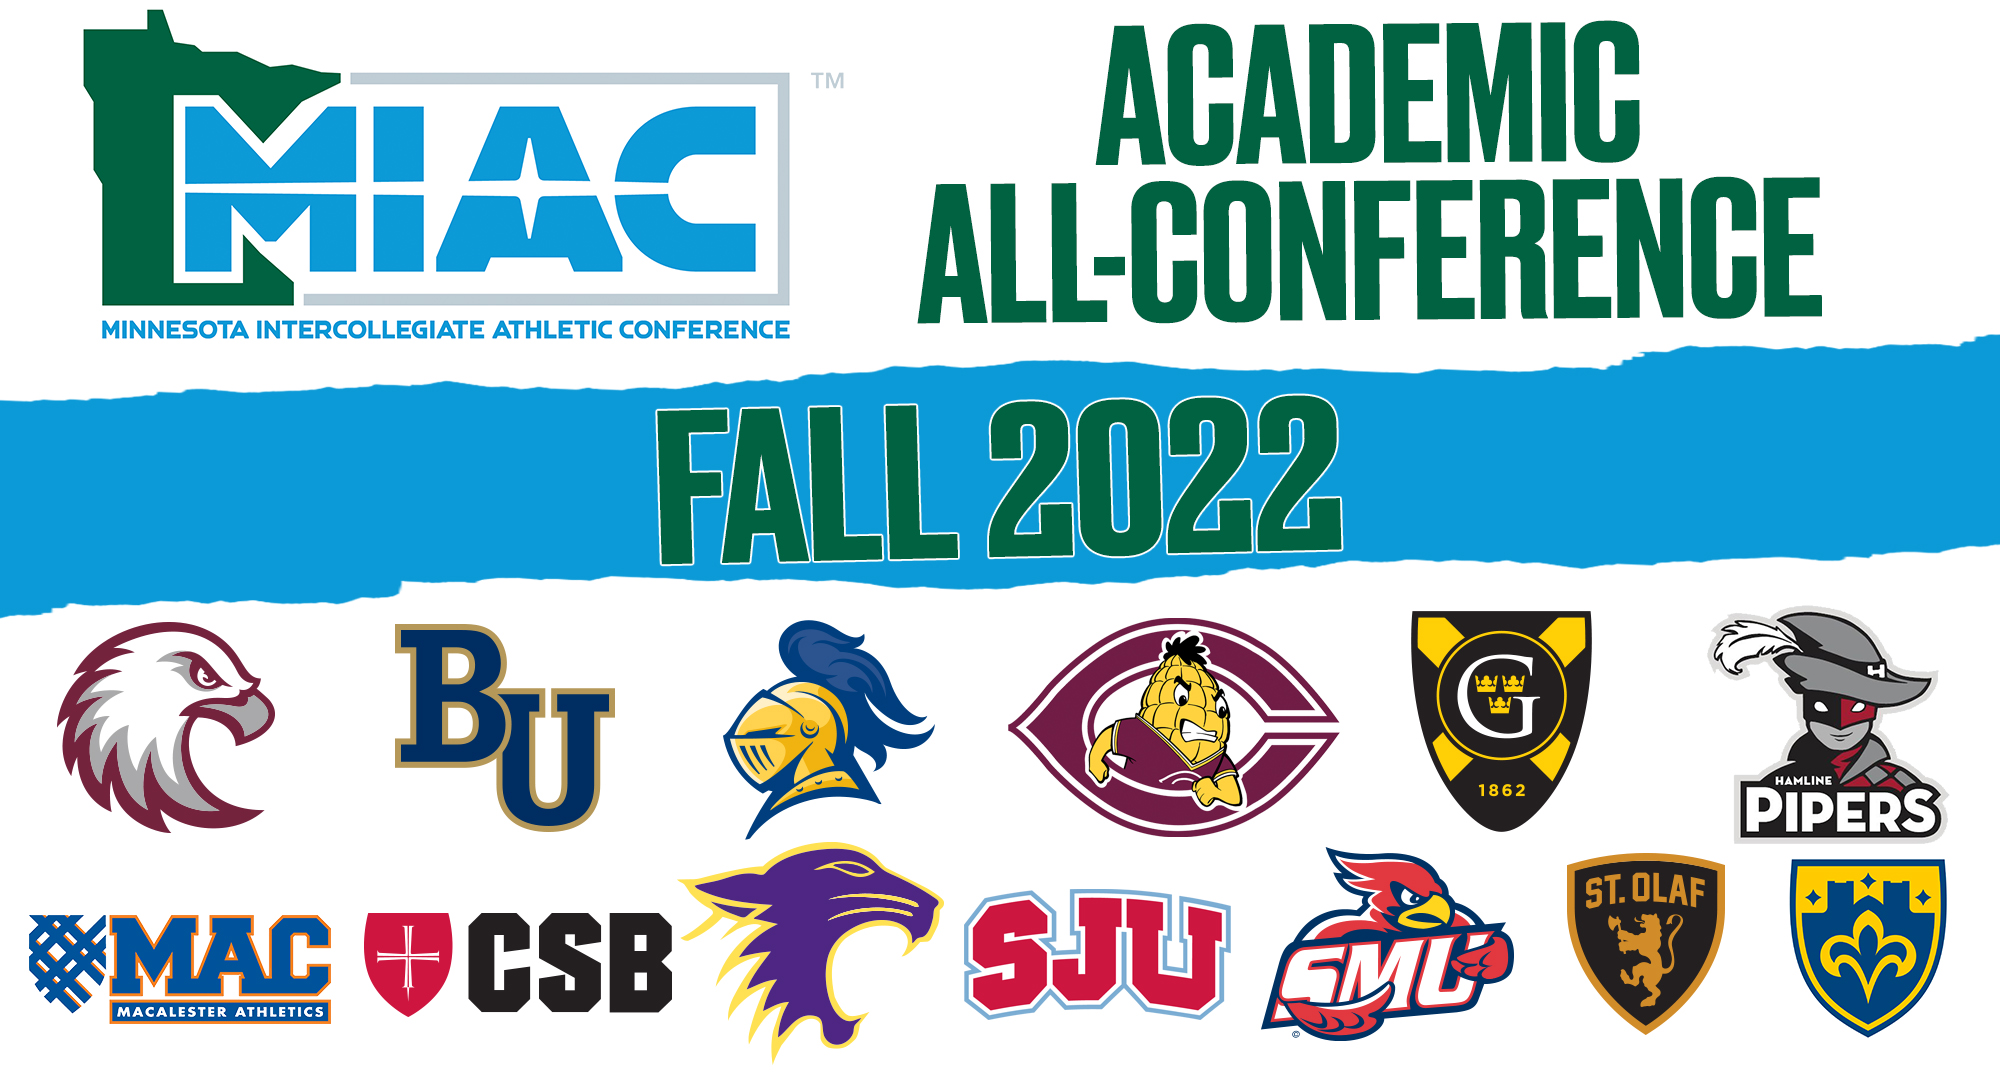 Concordia had a record-setting 51 fall student-athletes earn MIAC Academic All-Conference honors.